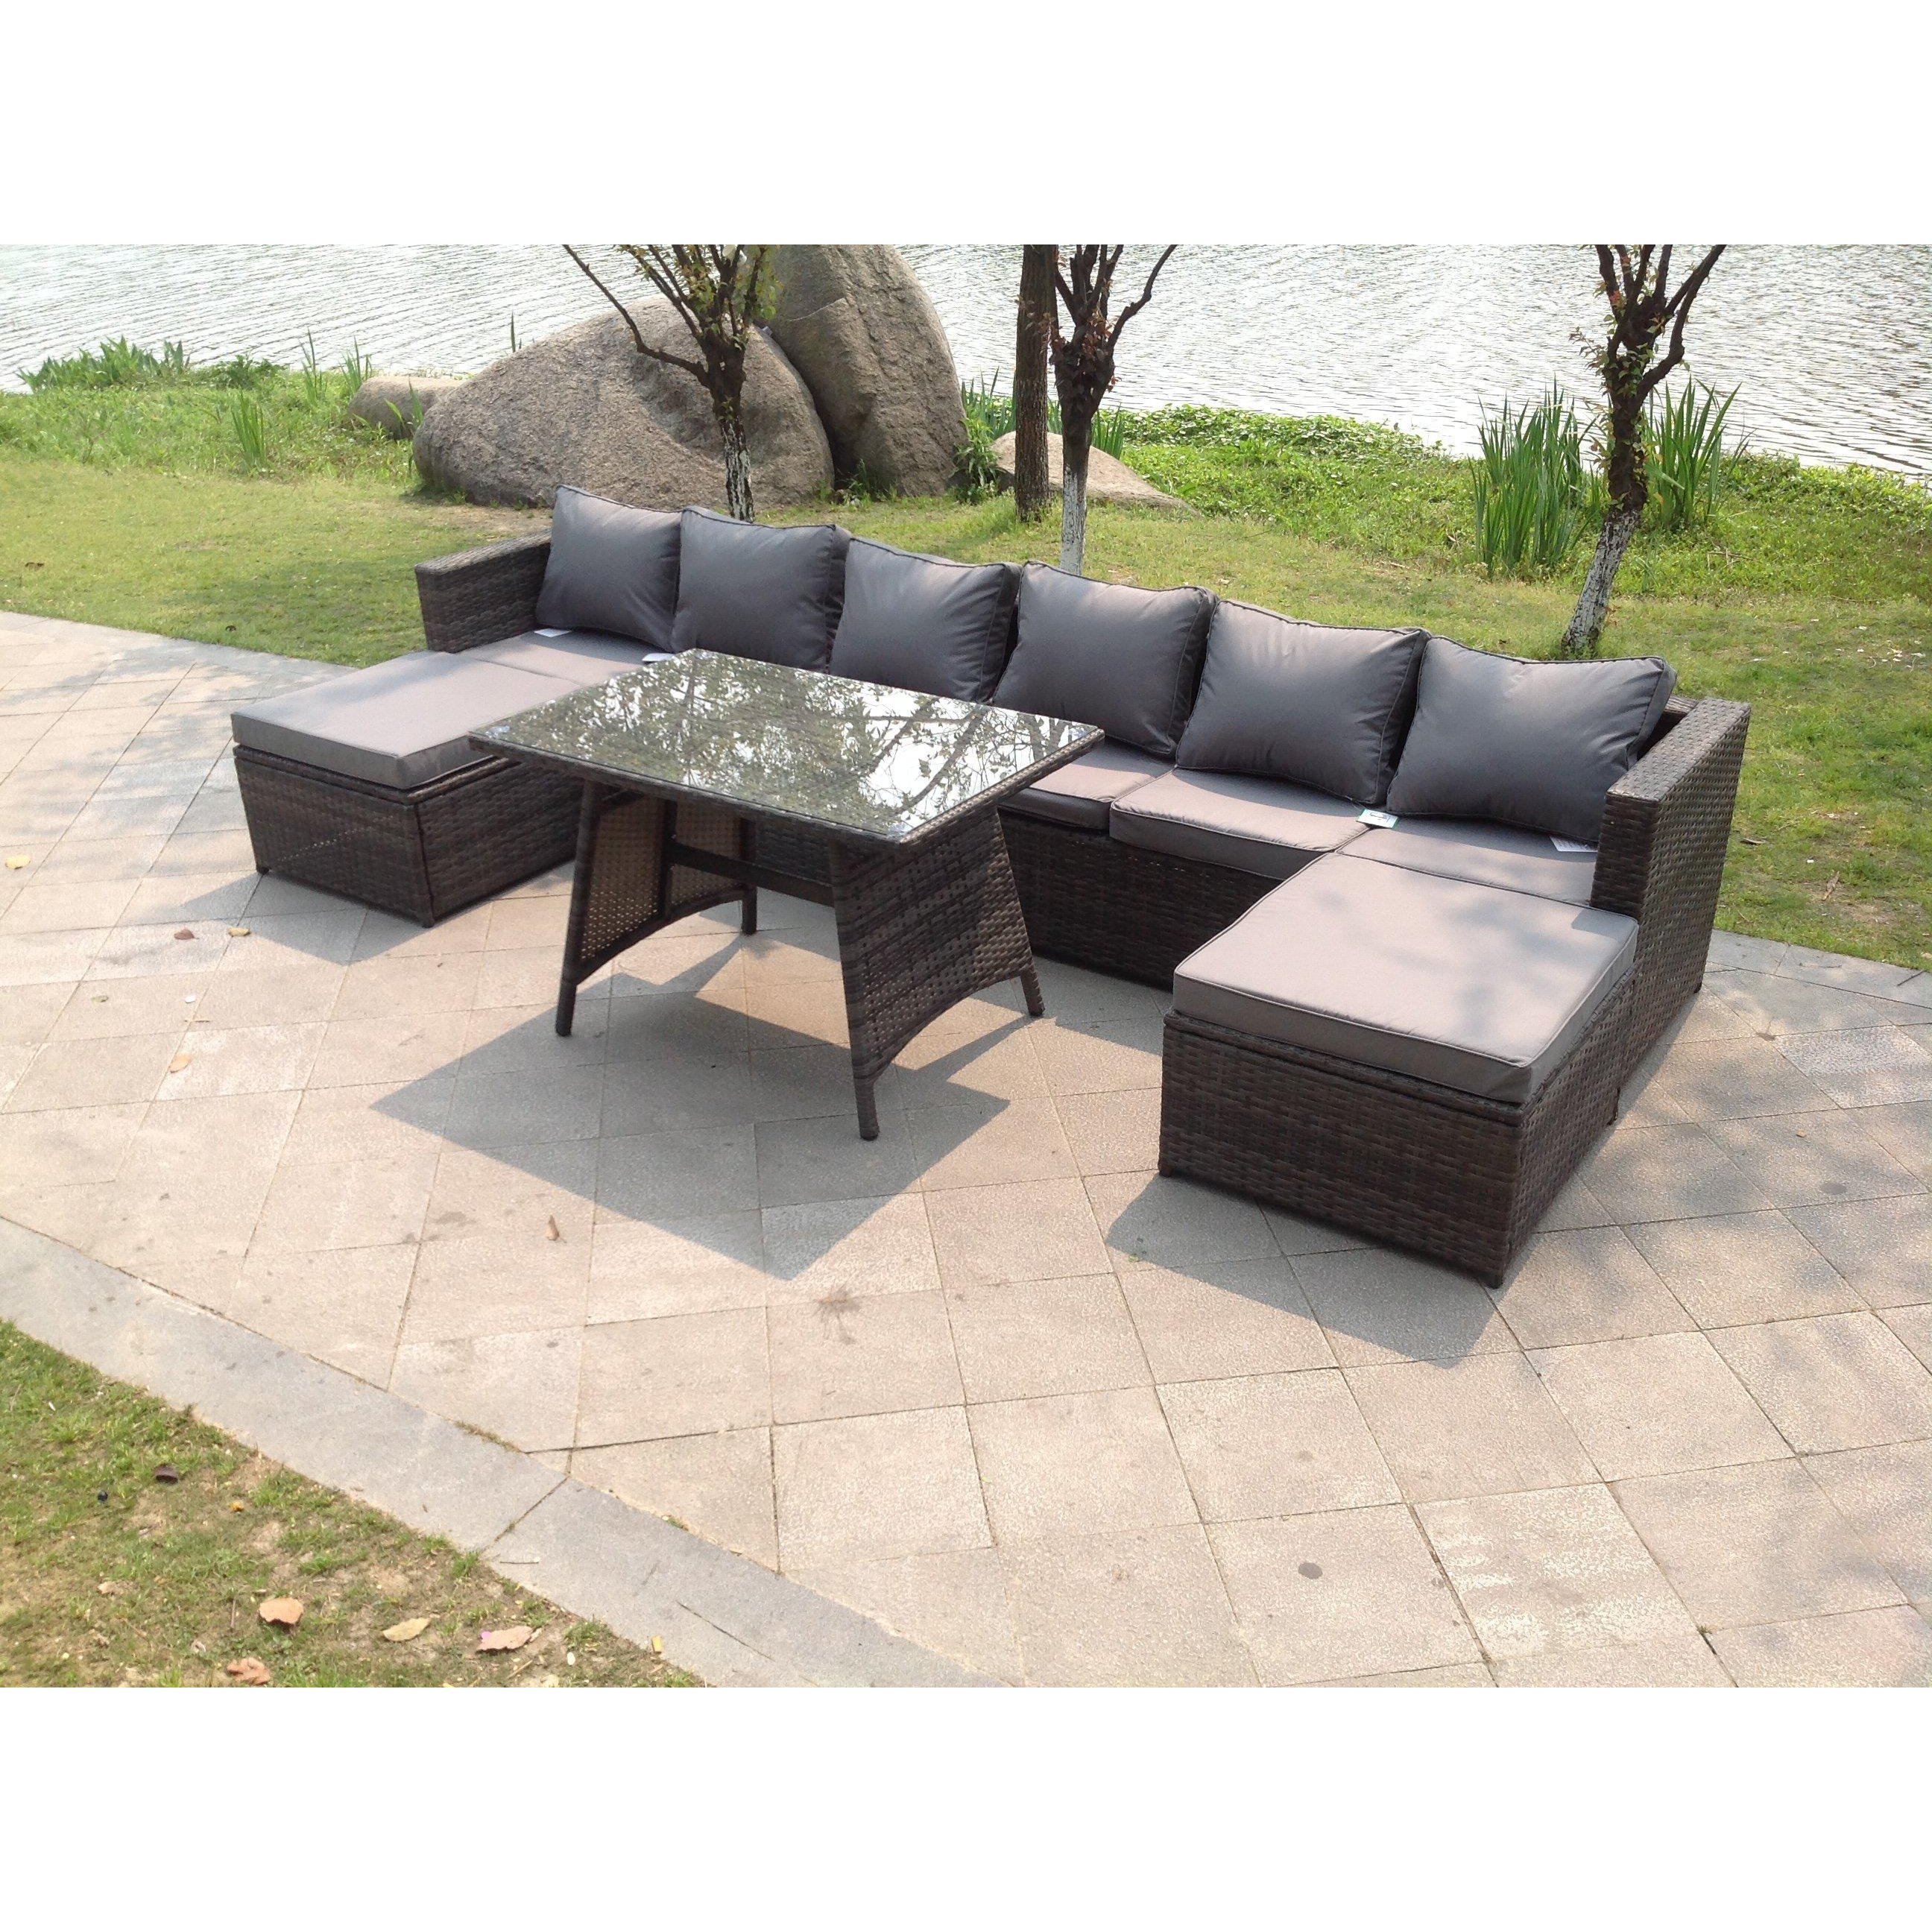 Lounge Rattan Garden Furniture Sets Dining Table And 2 PC Big Footstools - image 1